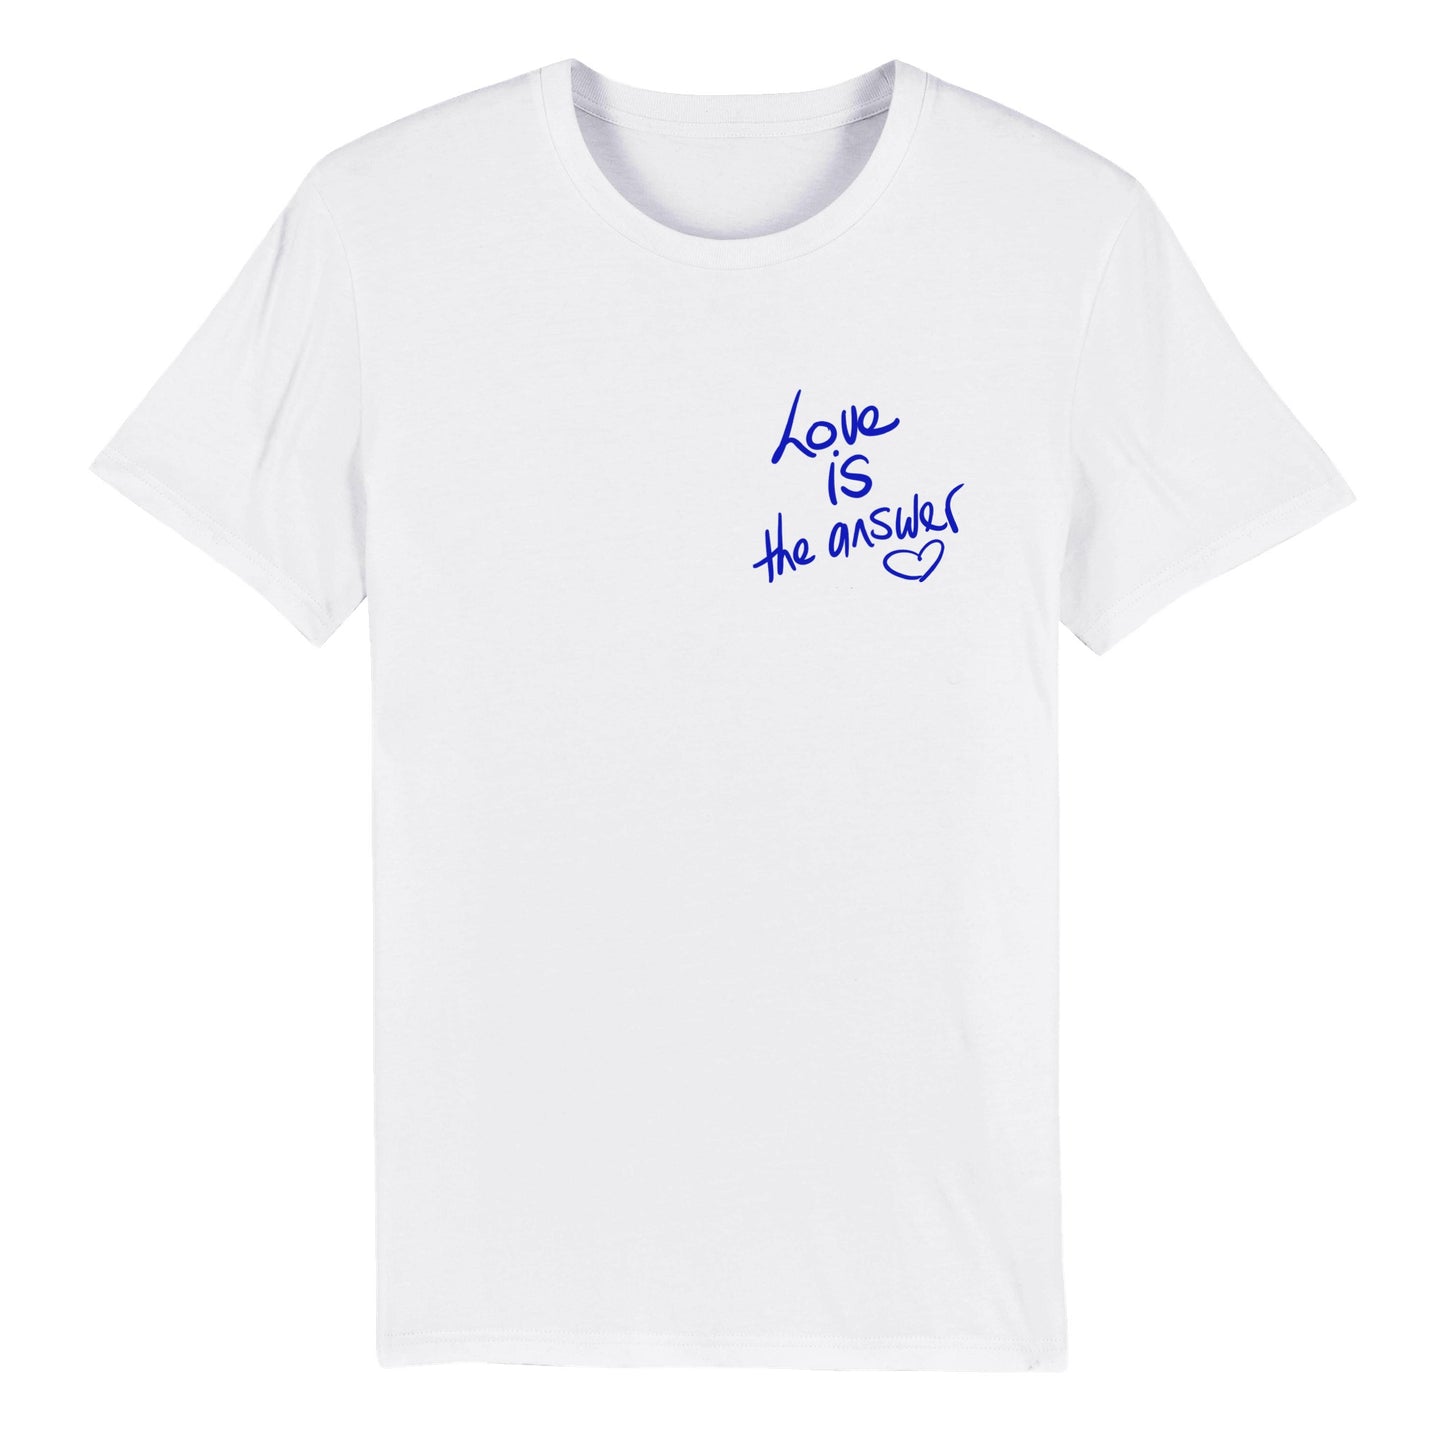 'Love IS the answer' Organic Unisex Crewneck T-shirt (blue on white - pocket print). Free Shipping.